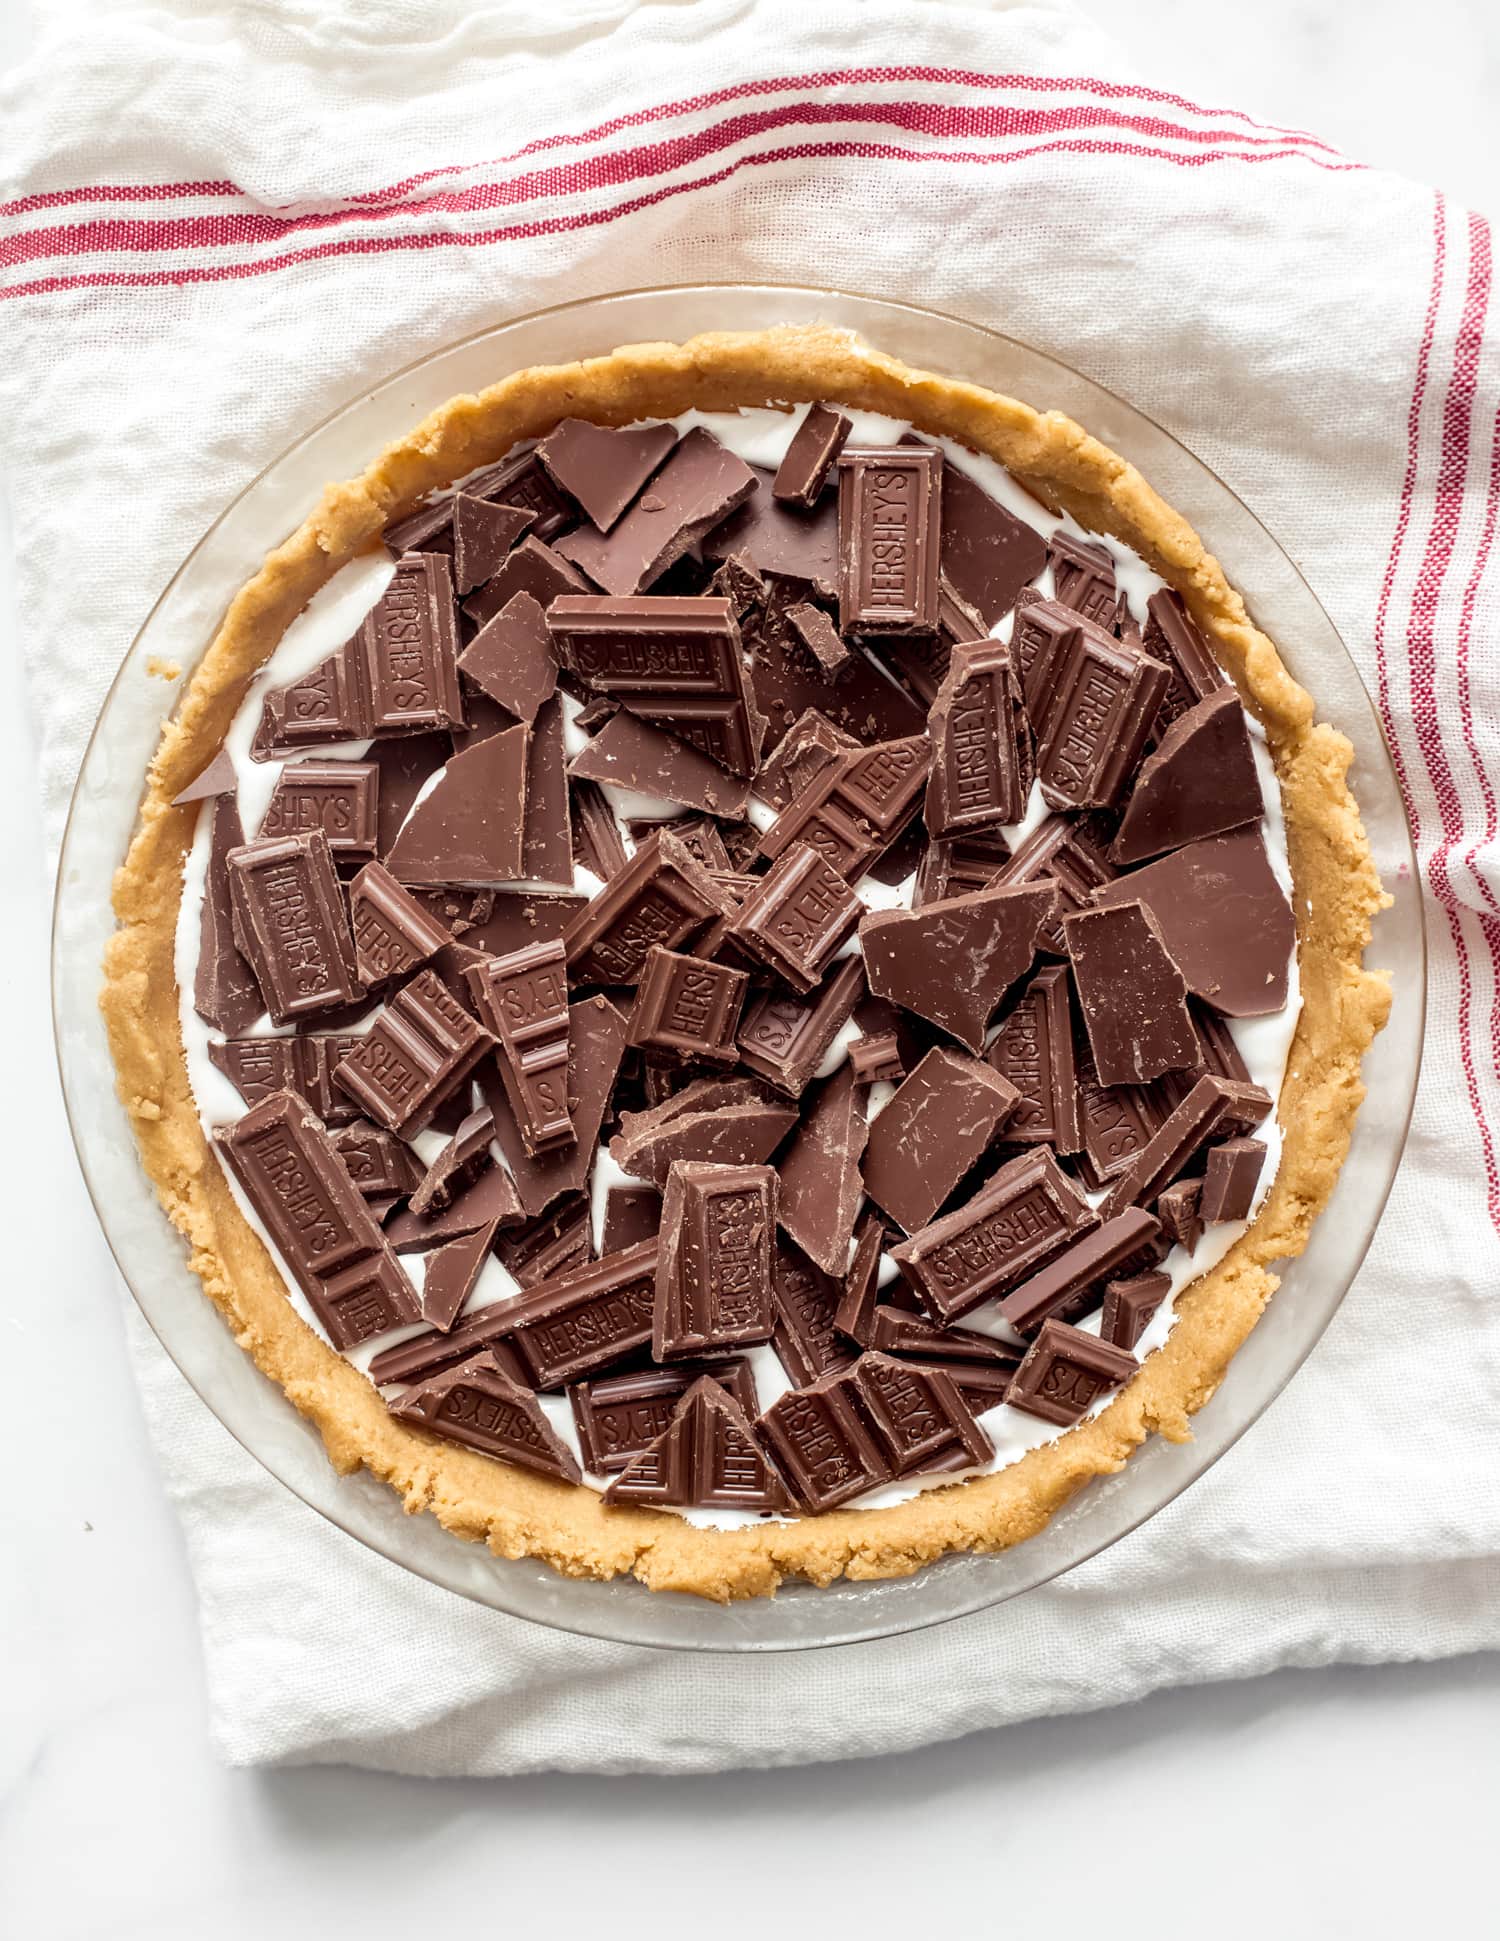 A pie from above filled with marshmallow fluff and Hershey's chocolate before being baked.